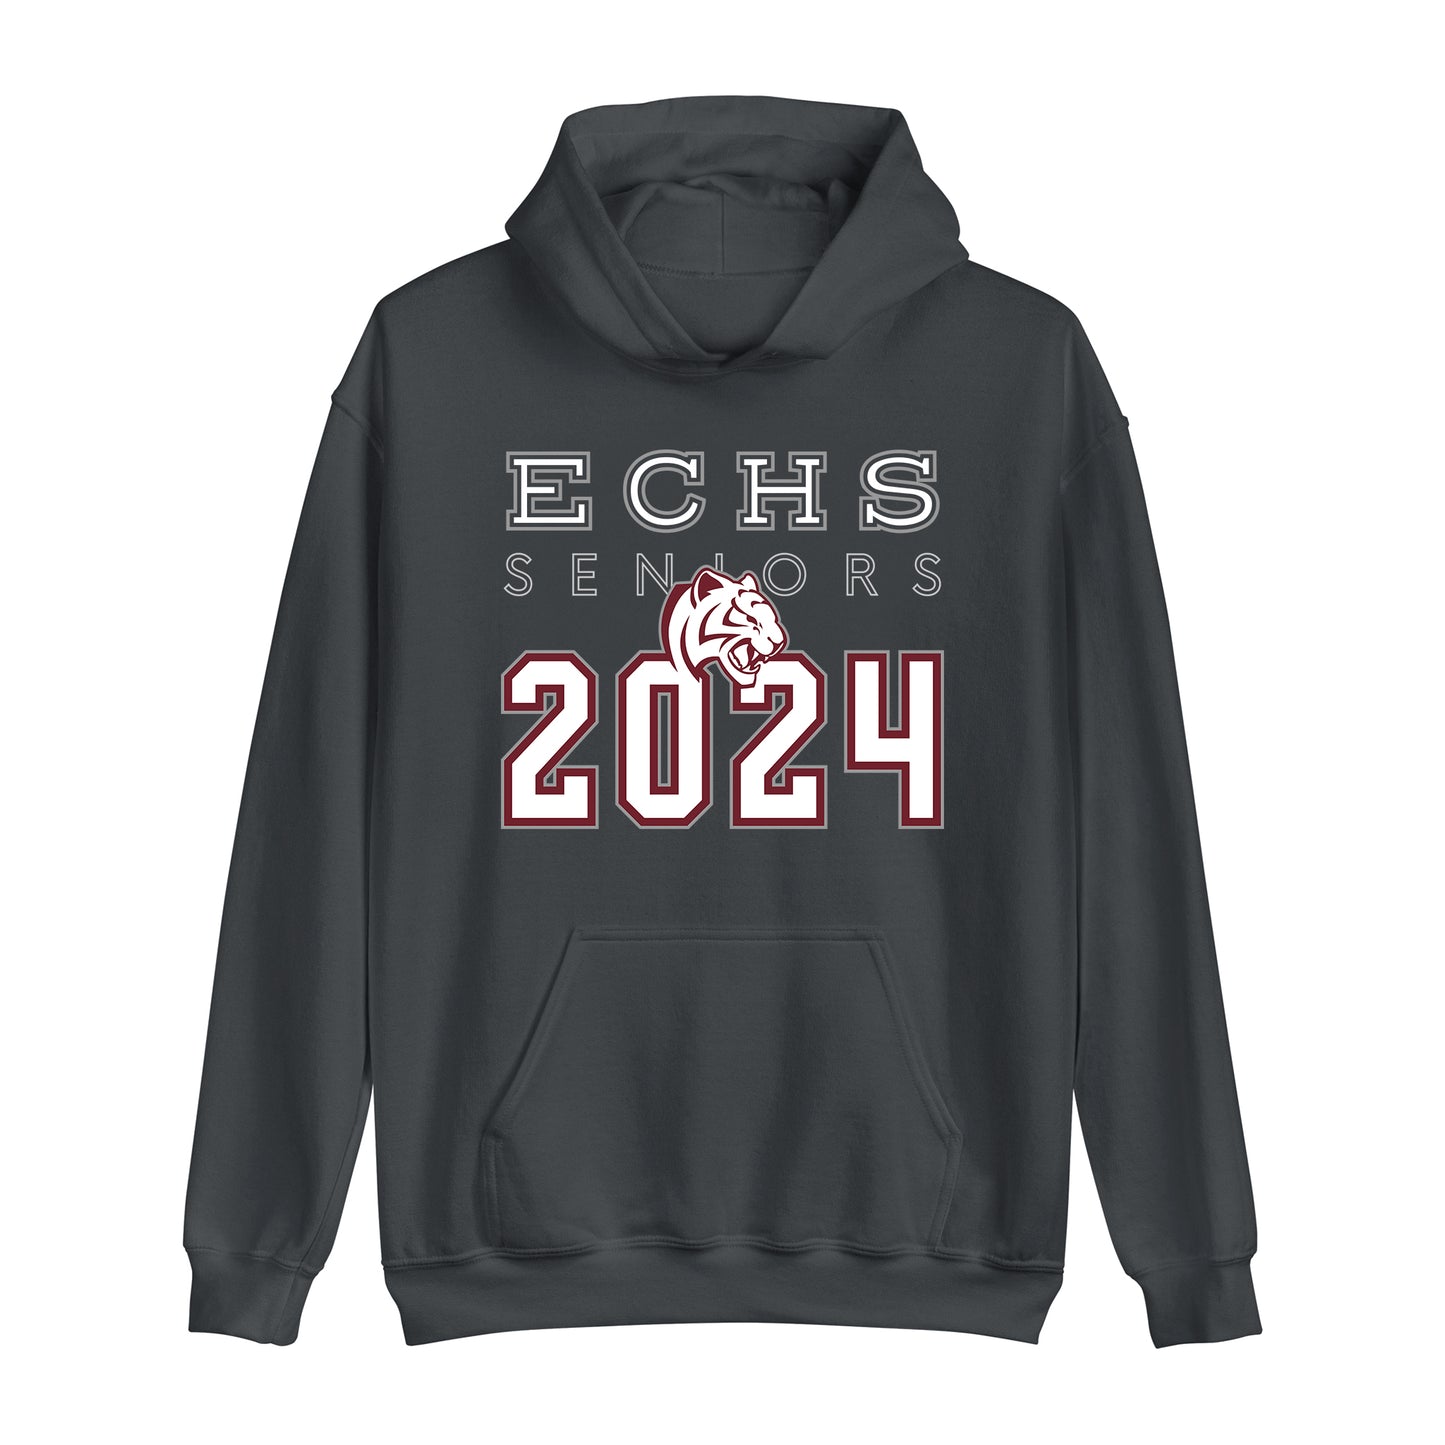 ECHS "Class of 2024" Graphic Hoodie